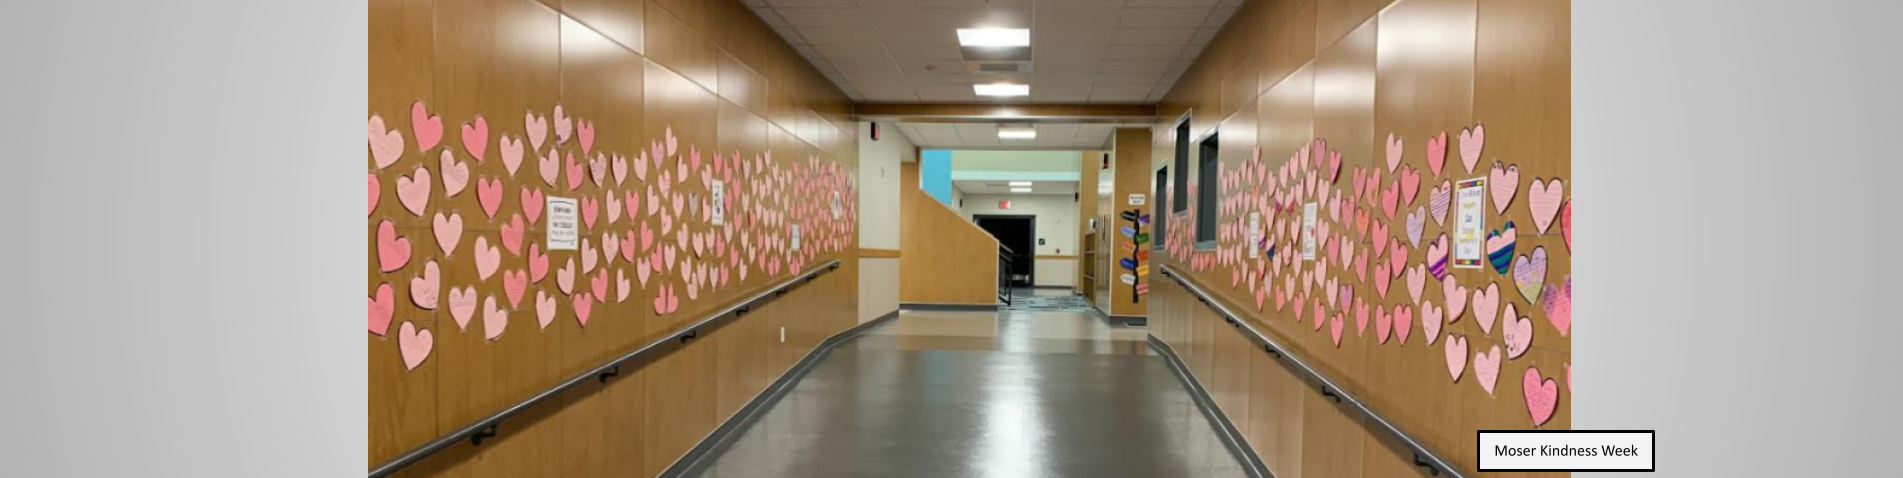 Moser hallway decorated with hearts for kindness week